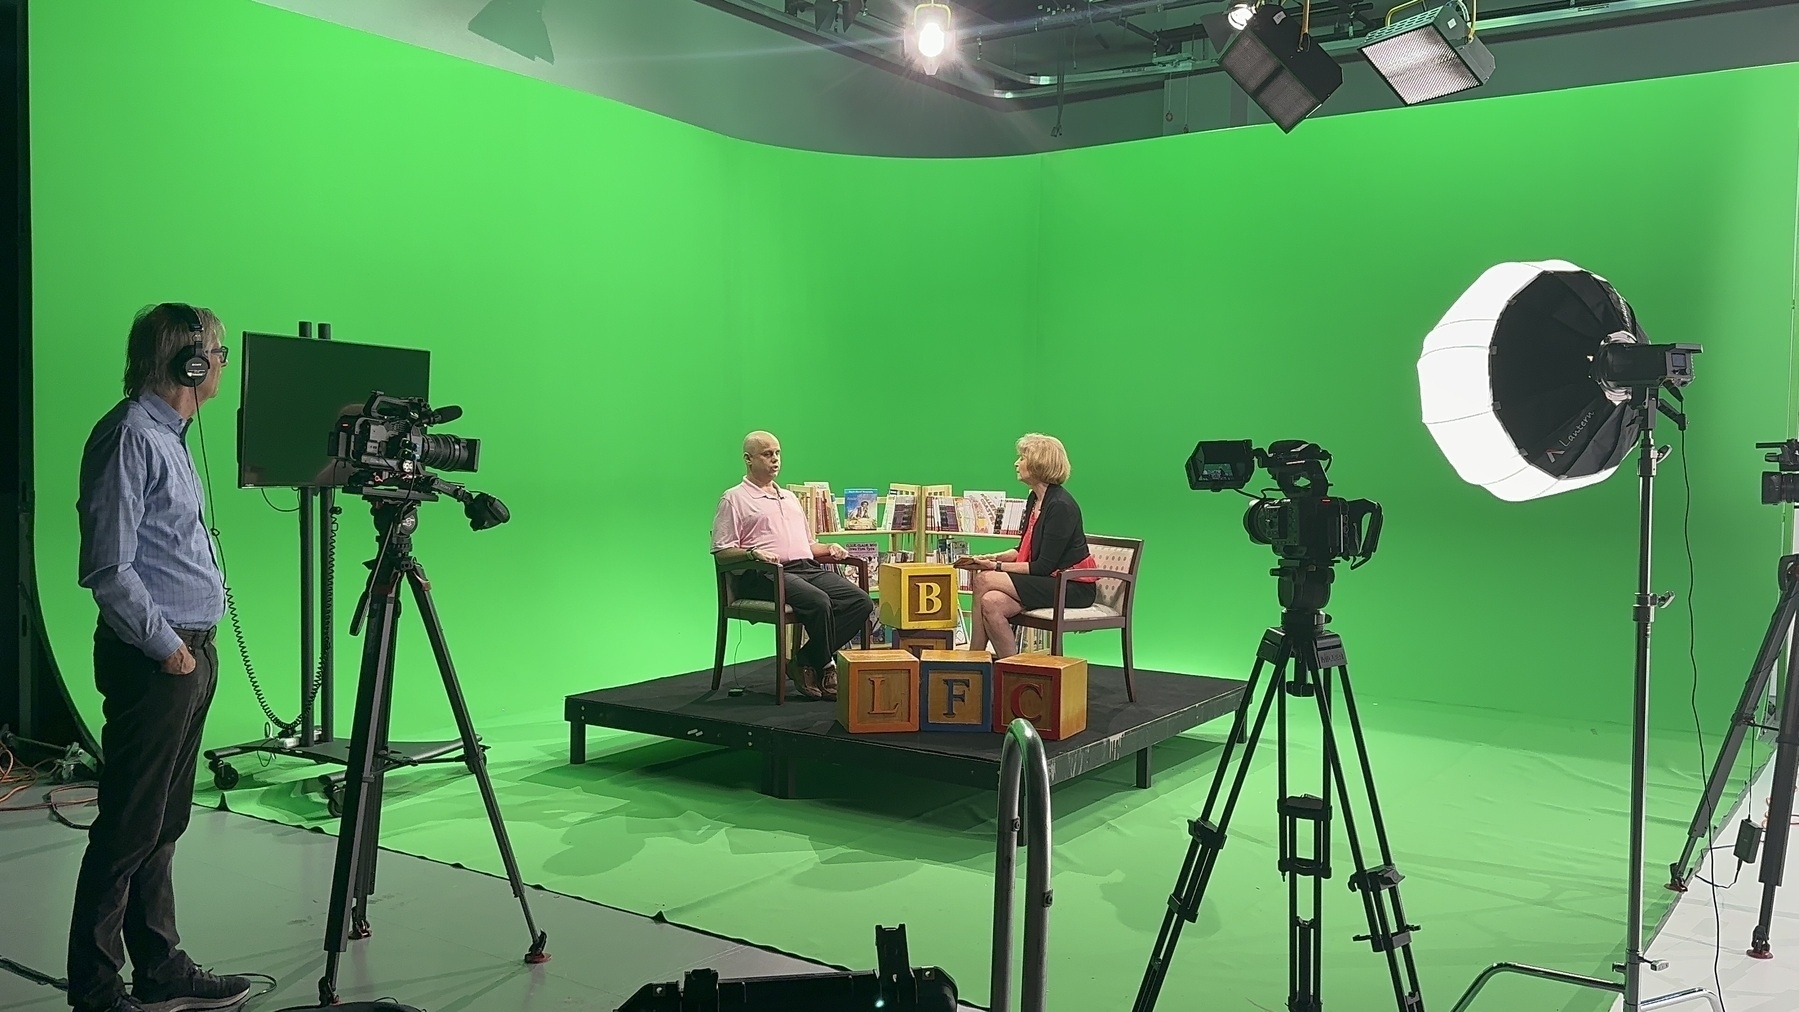 Auto-generated description: A green screen studio setup captures an interview between two people seated on a platform, surrounded by cameras and lighting equipment.